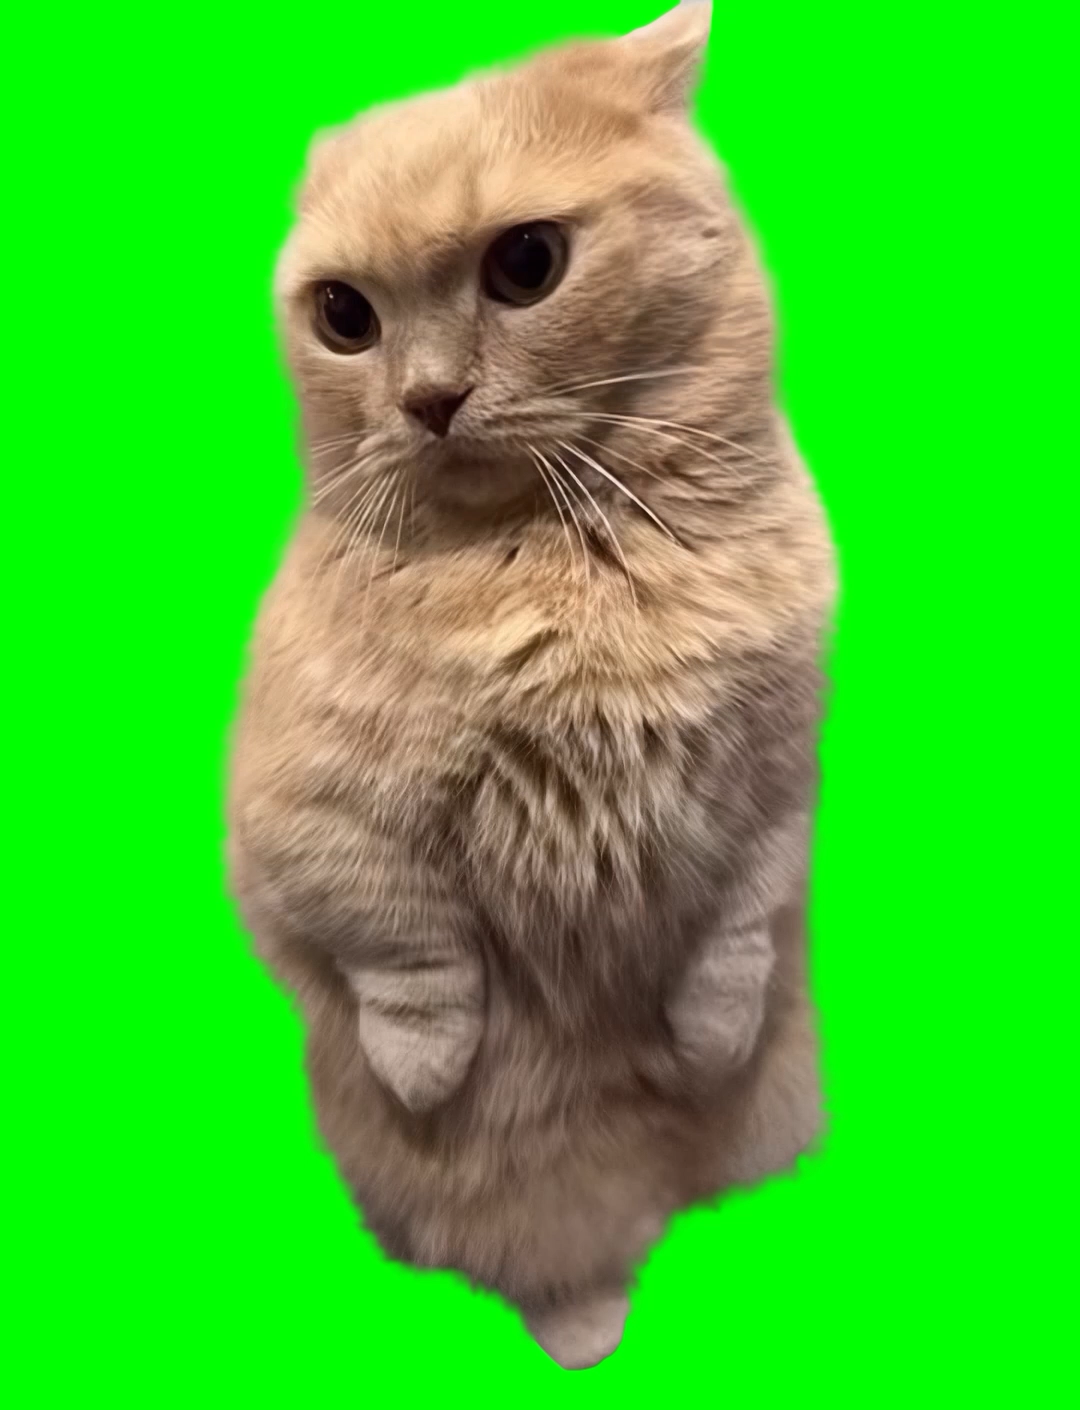 Cat getting poked and annoyed (Green Screen)